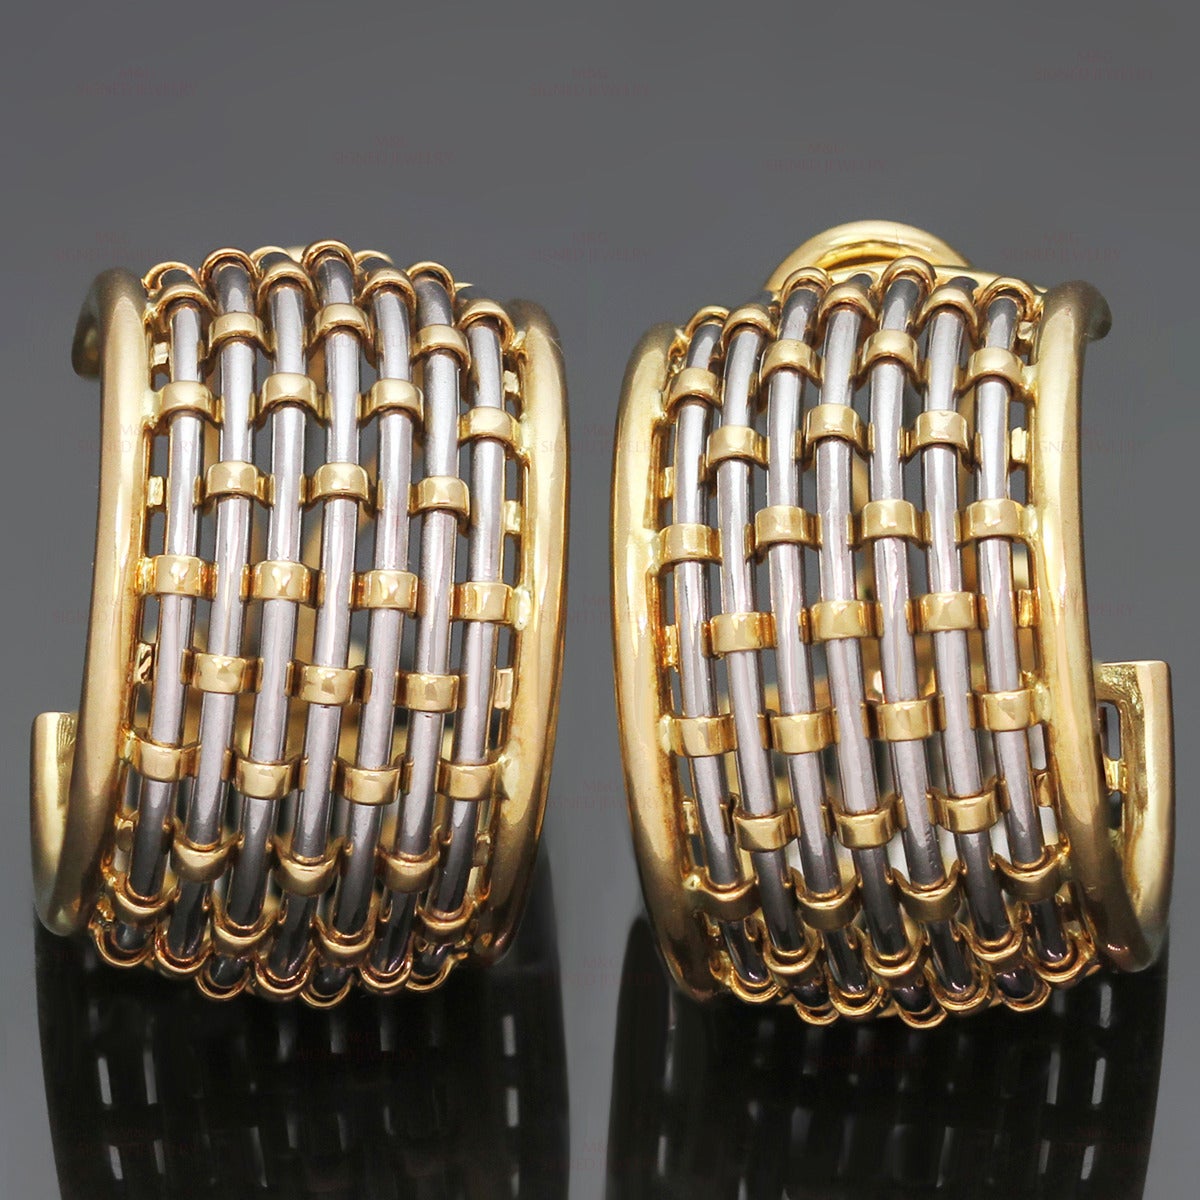 These classic Cartier hoop earrings feature a braided design crafted in 18k yellow gold and stainless steel. Made in France circa 1980s. Measurements: 0.51" (13mm) width, 0.86" (22mm) length.